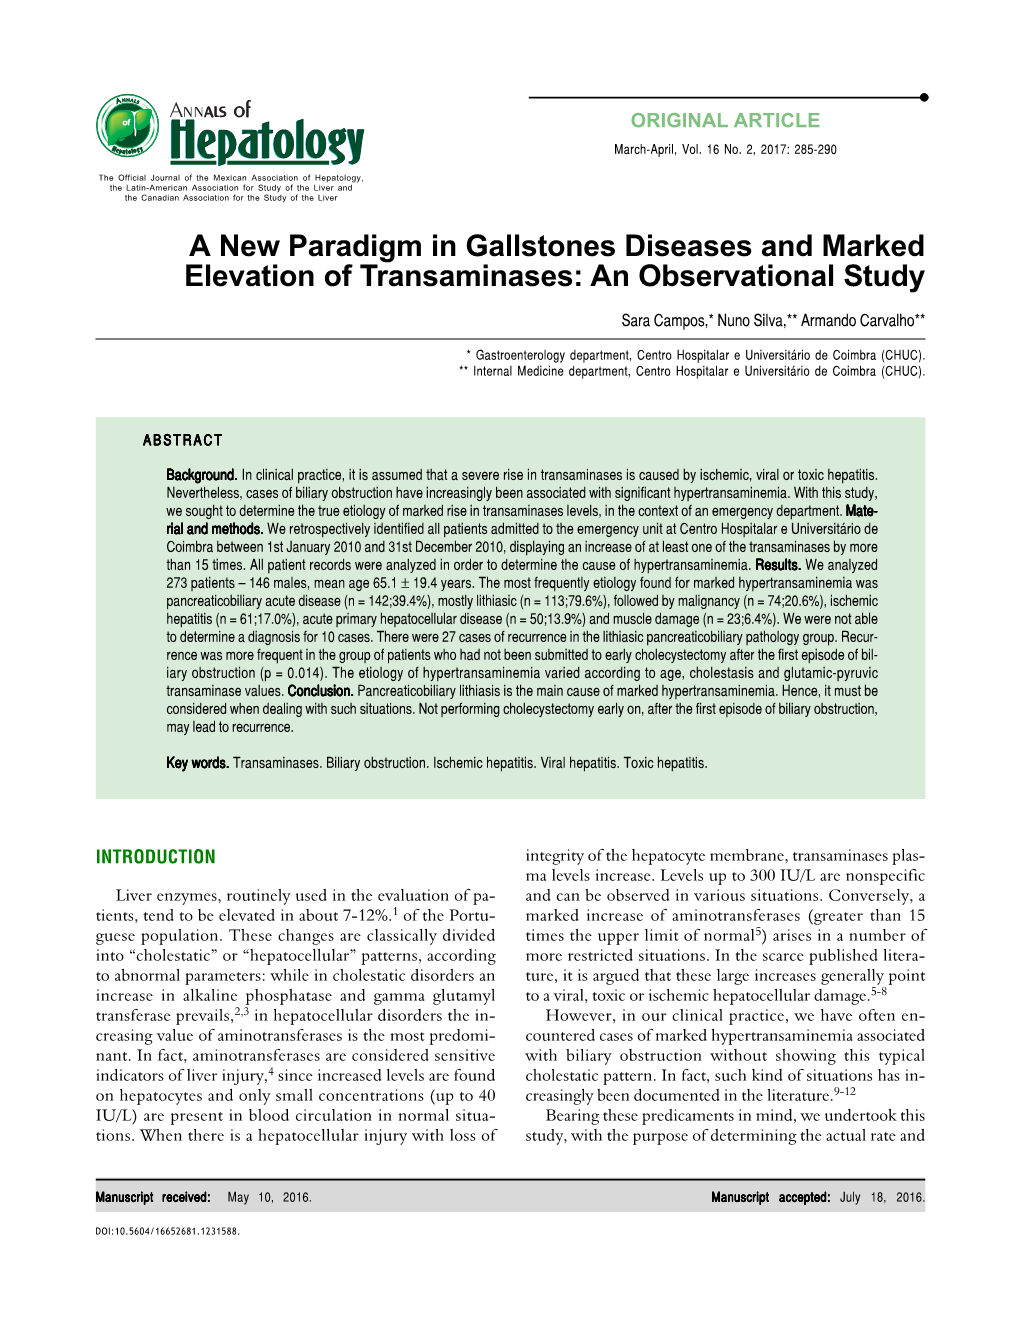 A New Paradigm in Gallstones Diseases and Marked Elevation of Transaminases